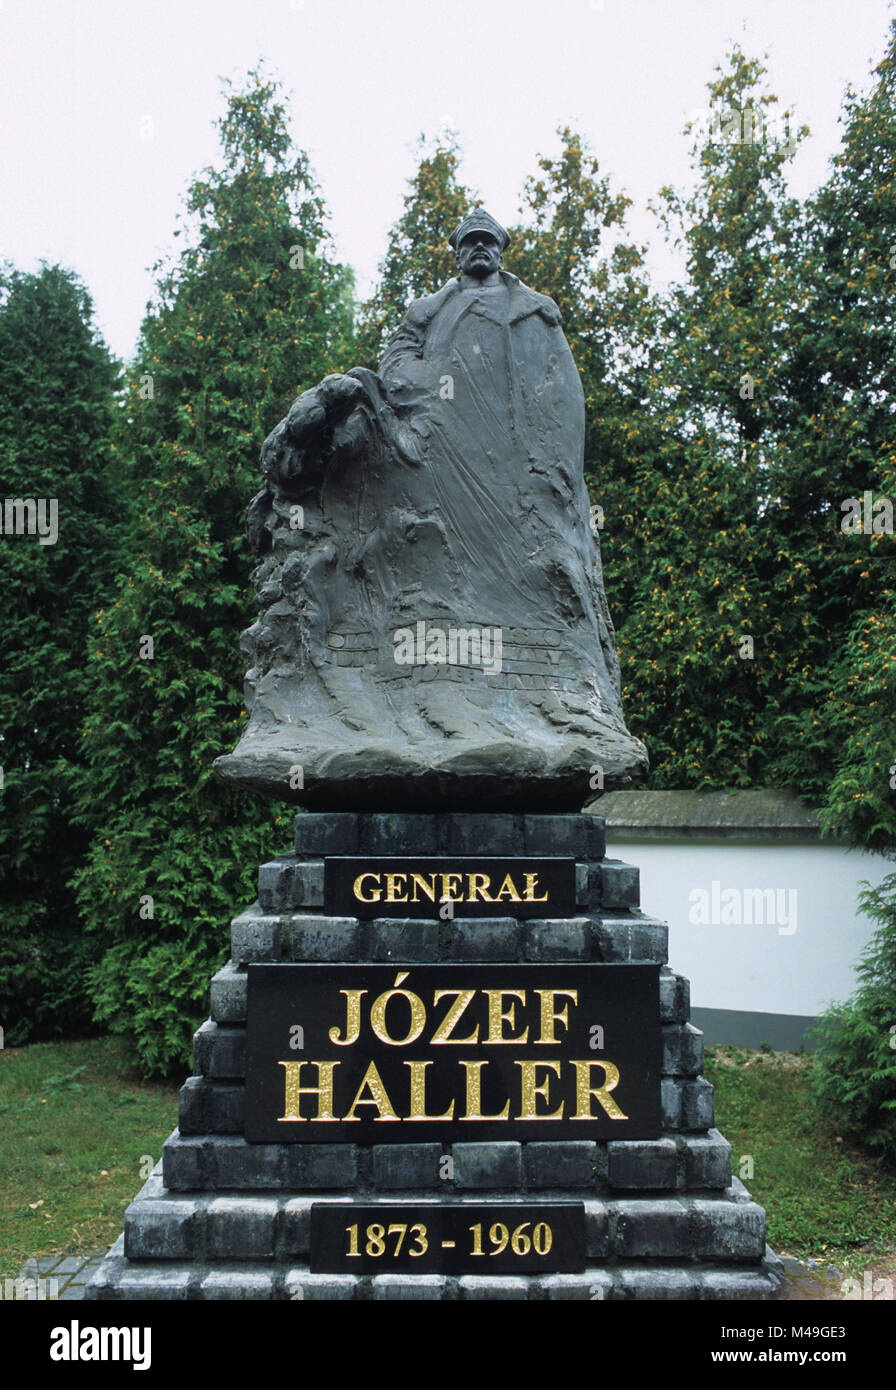 Polish War Cemetery in Ossow near Warsaw Poland. Memorial and statue of General Jozef Haller, a Polish military leaders in the Battle of Warsaw 1920 Stock Photo